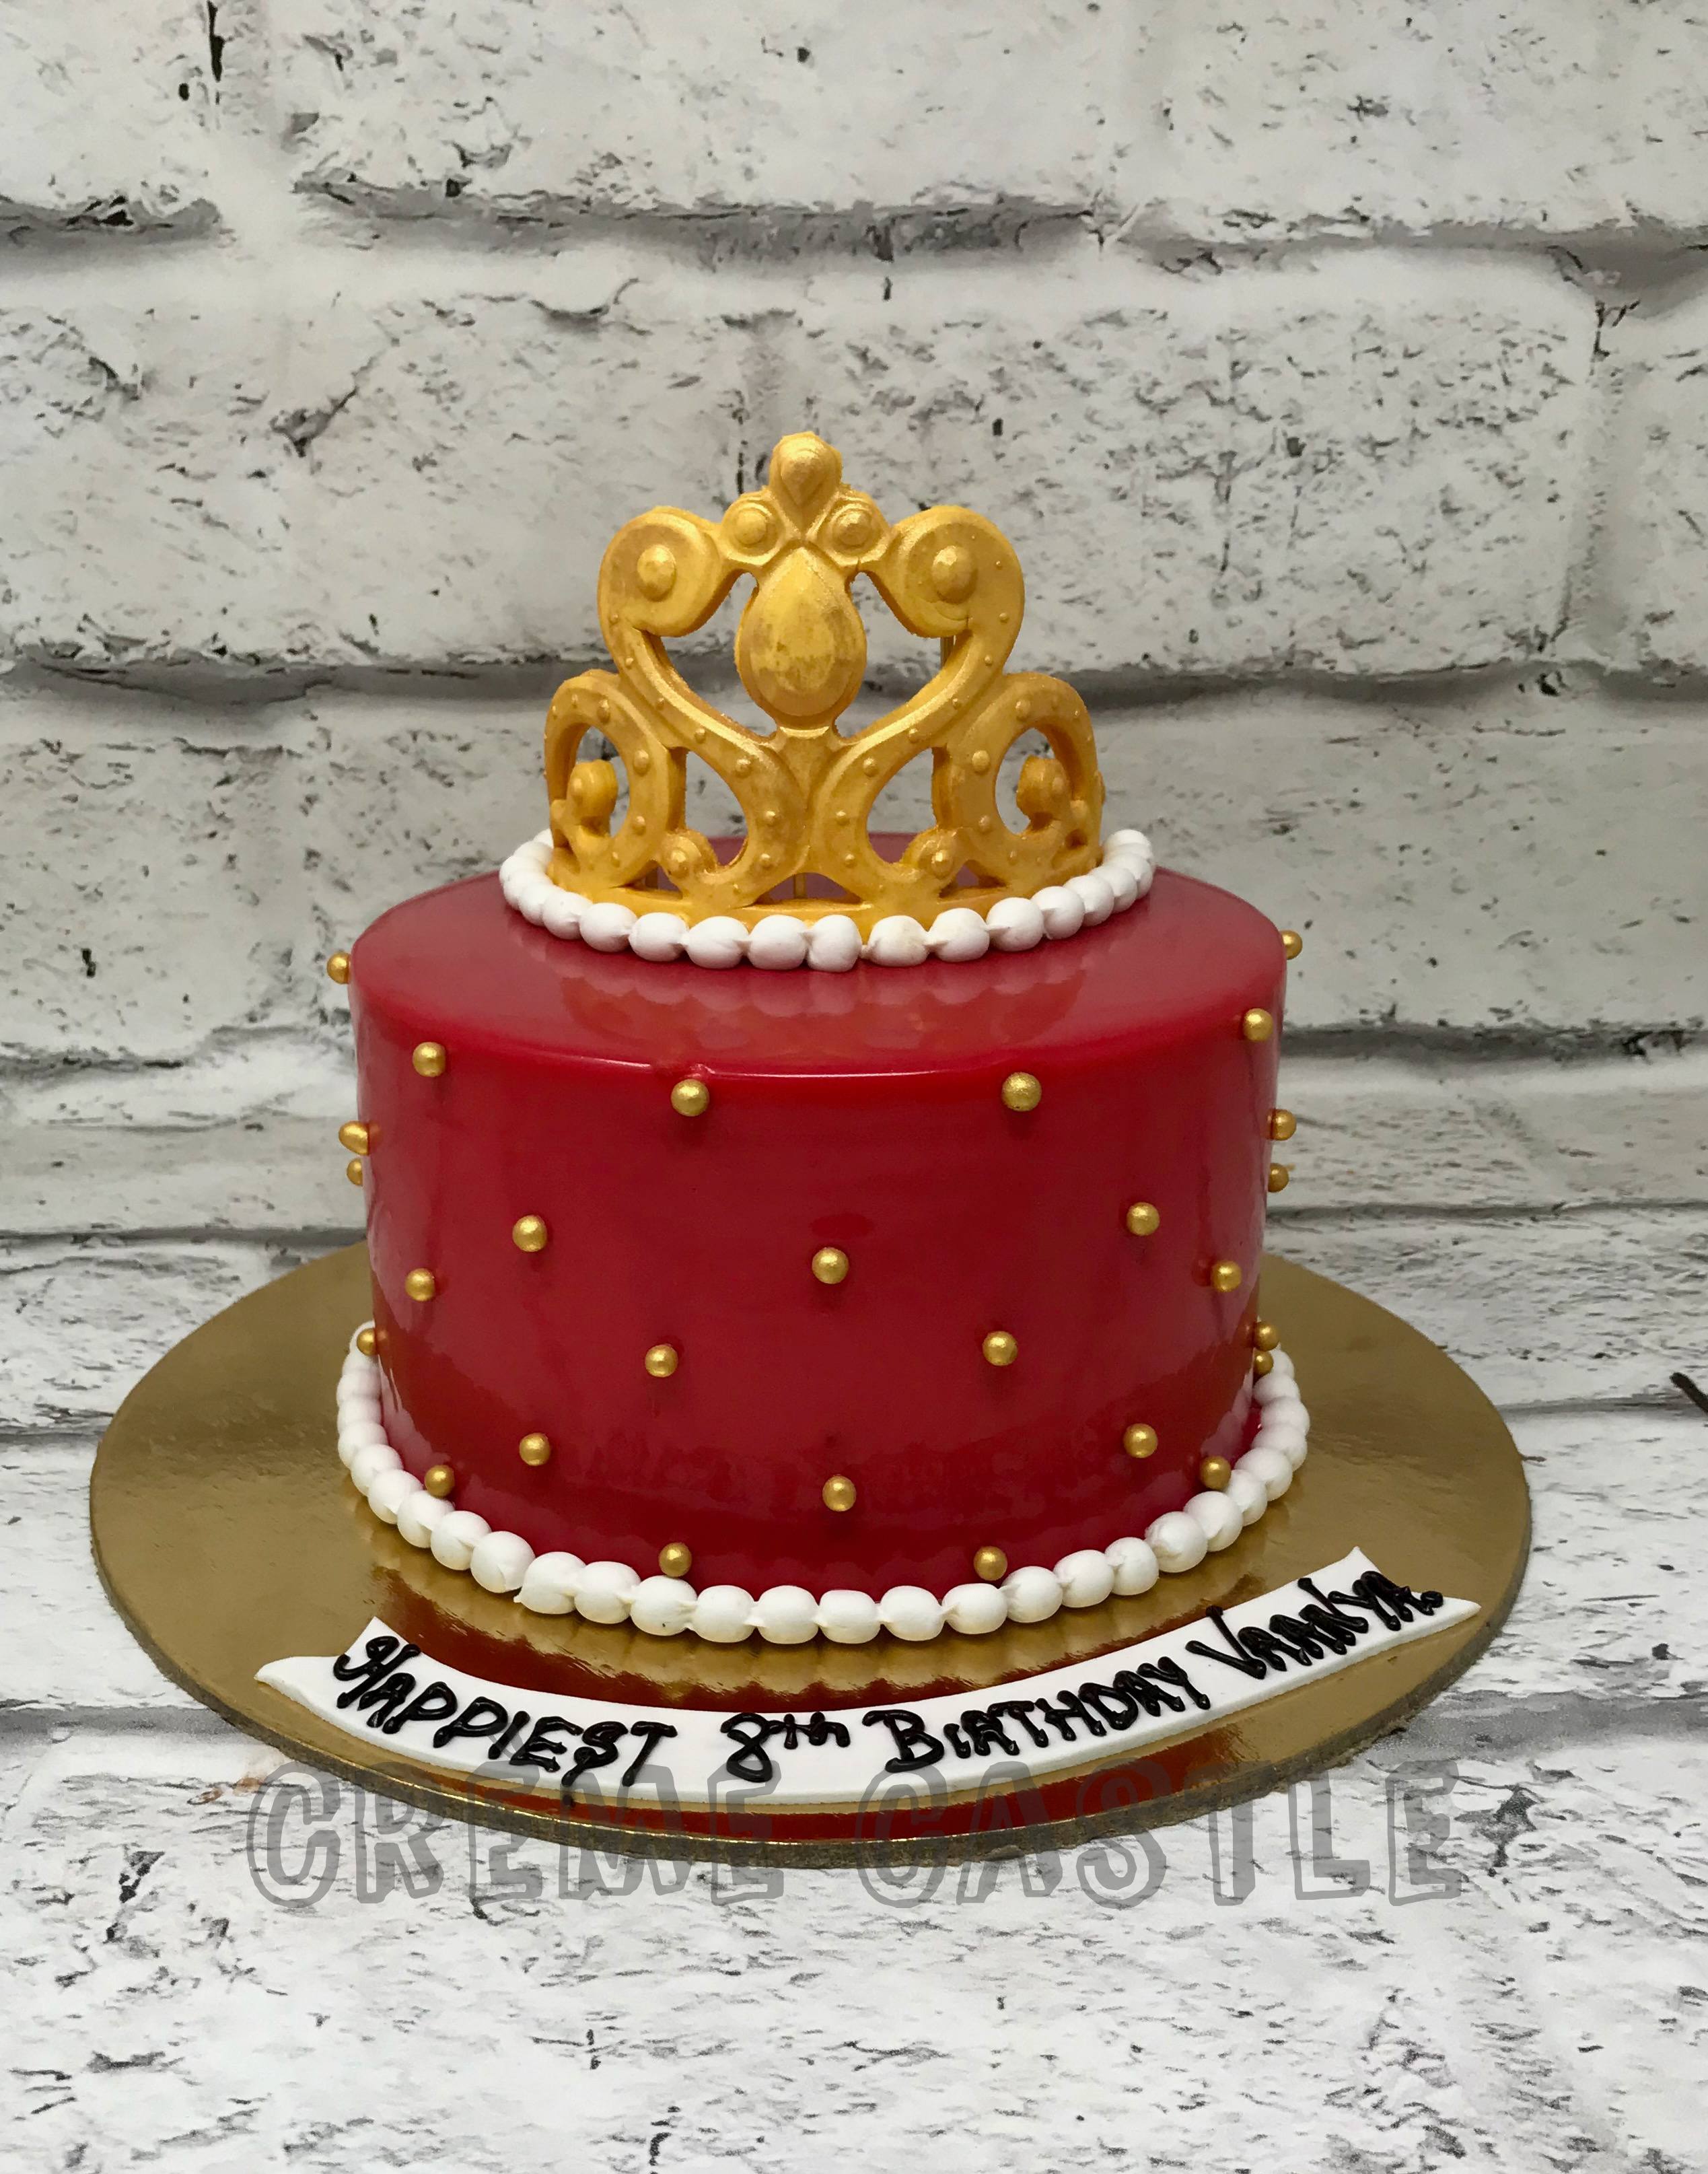 ButterScotch Cake with Red Reses Basket Delivery in India from  SendBestGift.com